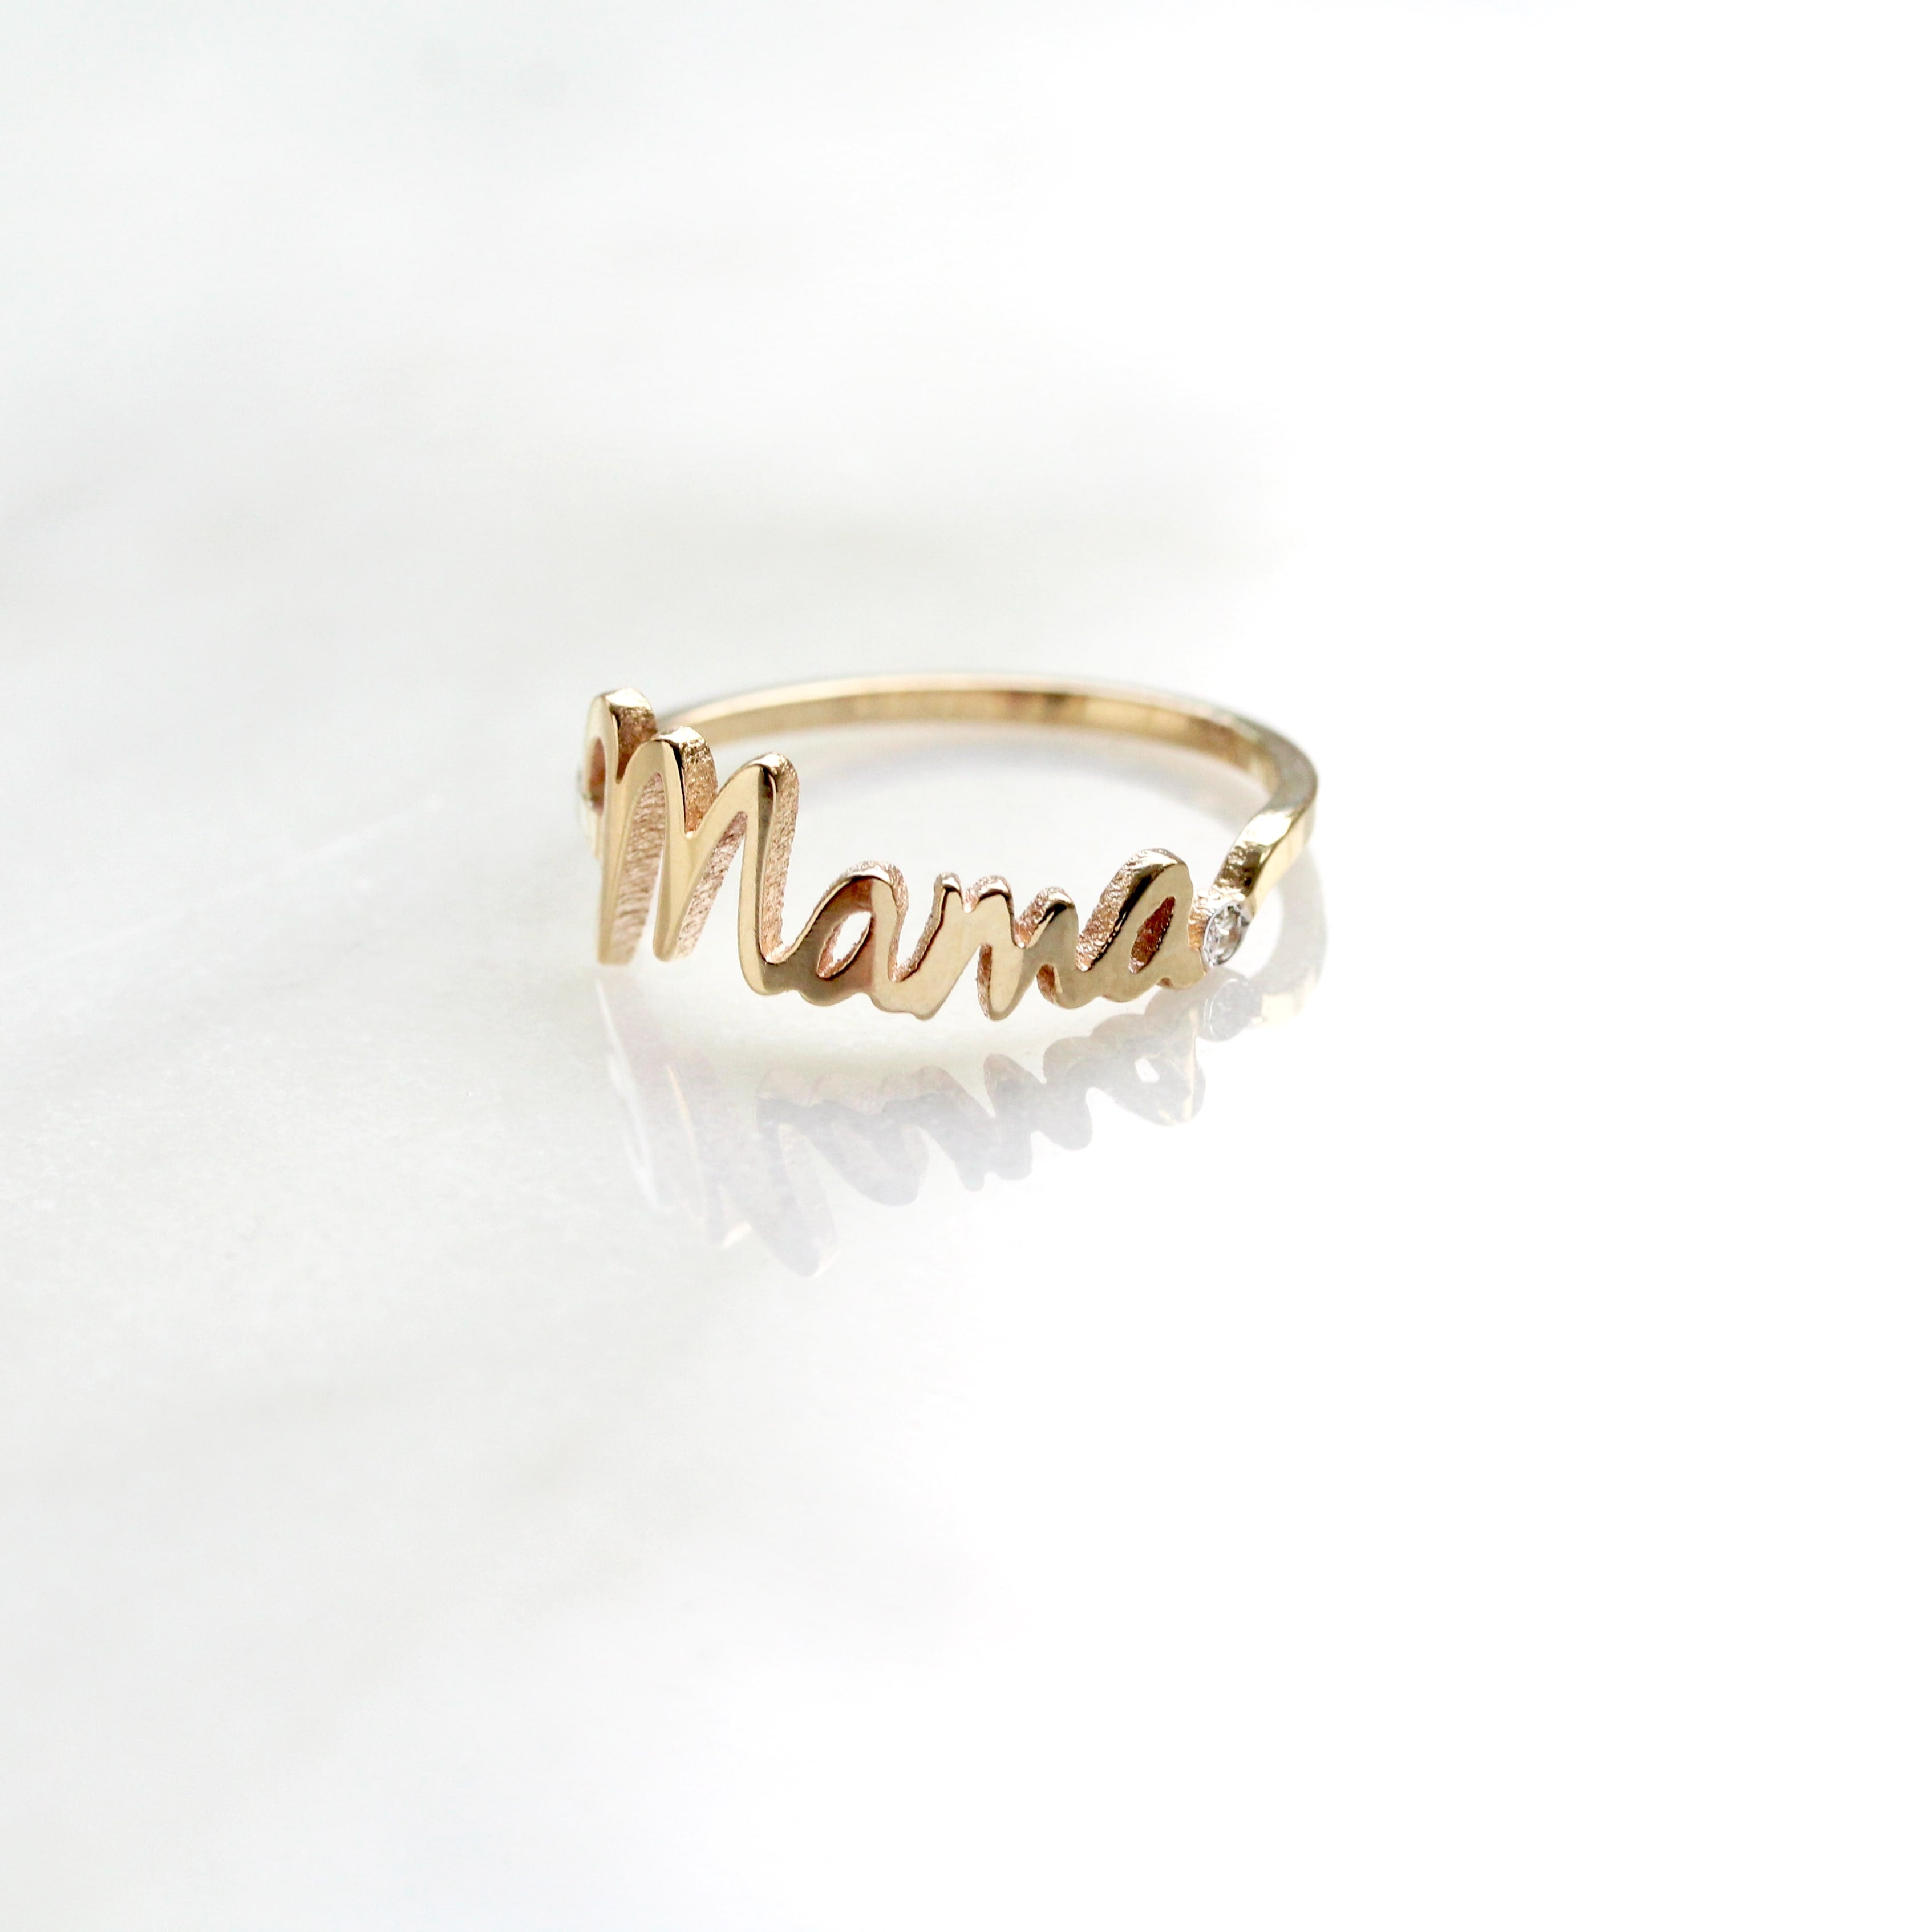 Buy 14k Gold Custom Name Ring Emerald Ring 0.10ct Online at SO ICY JEWELRY